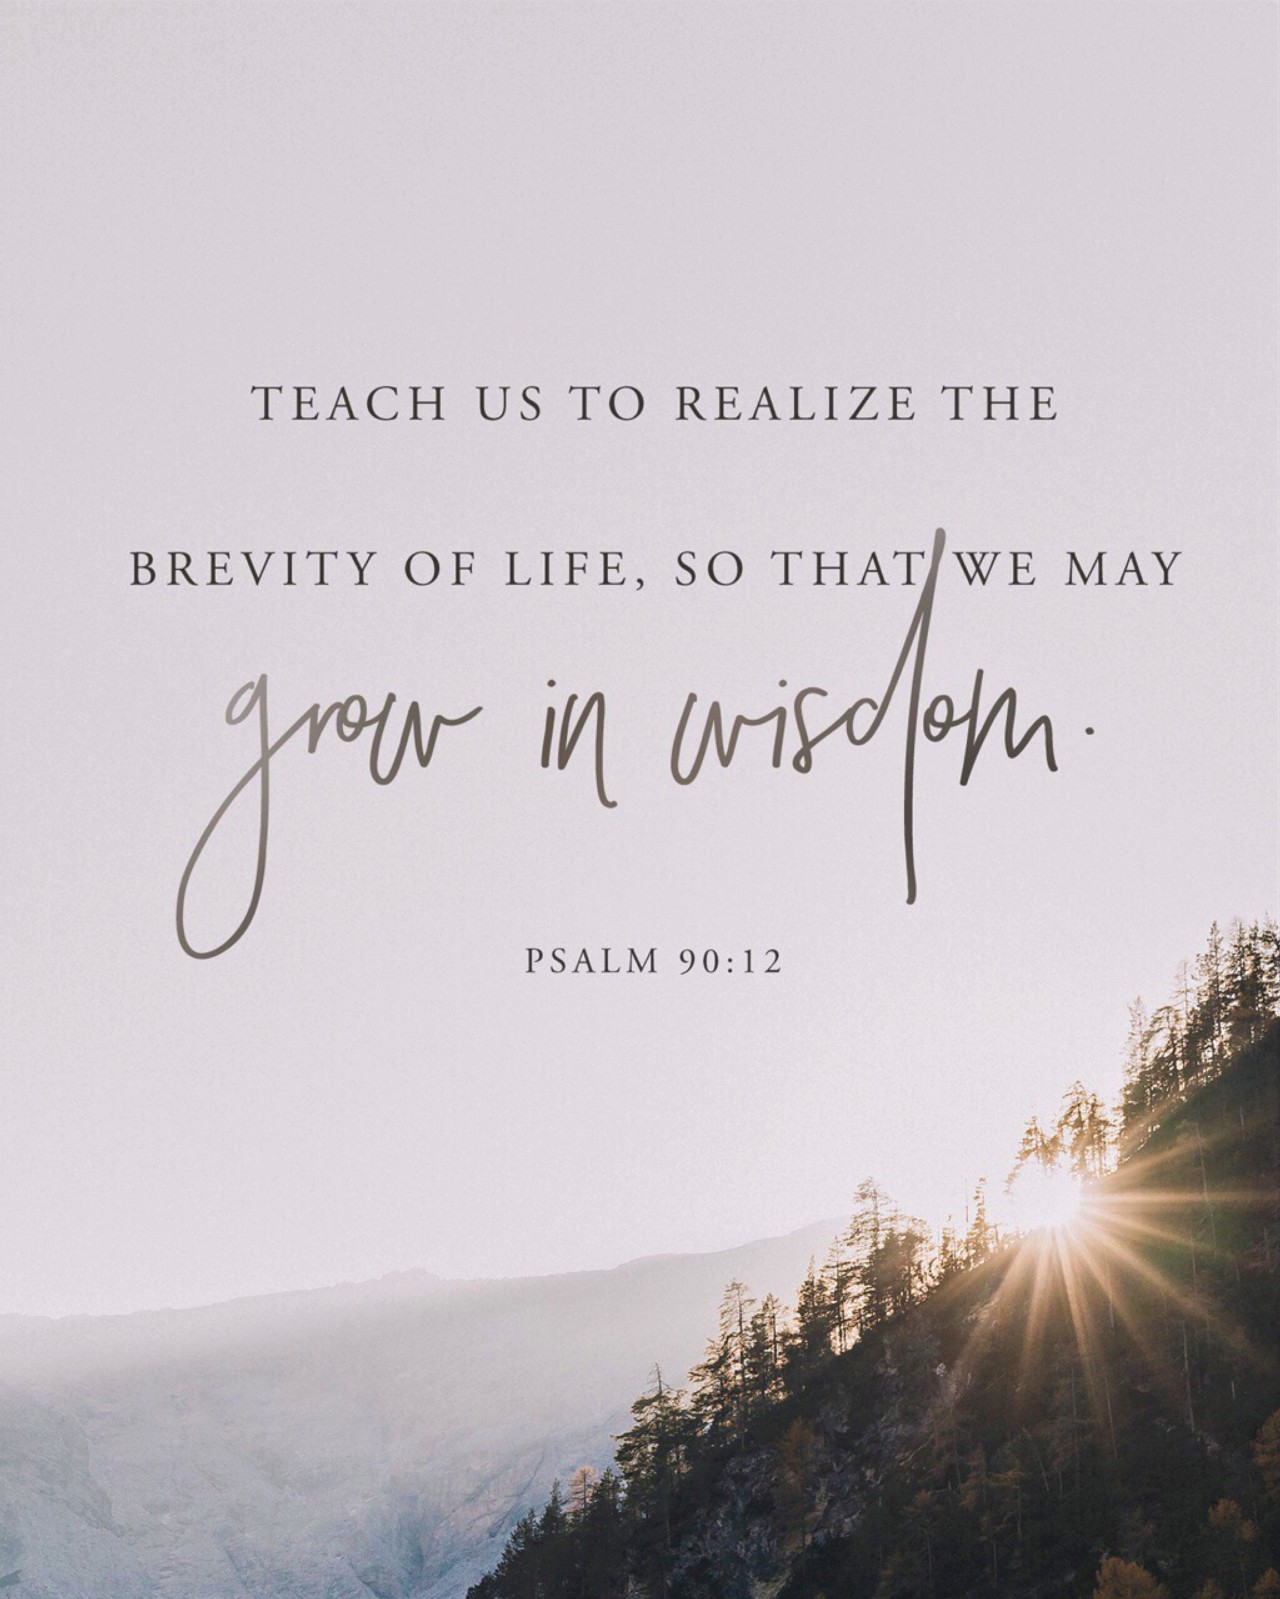 Psalm 90:12 (NLT) - Teach us to realize the brevity of life, so that we may grow in wisdom.